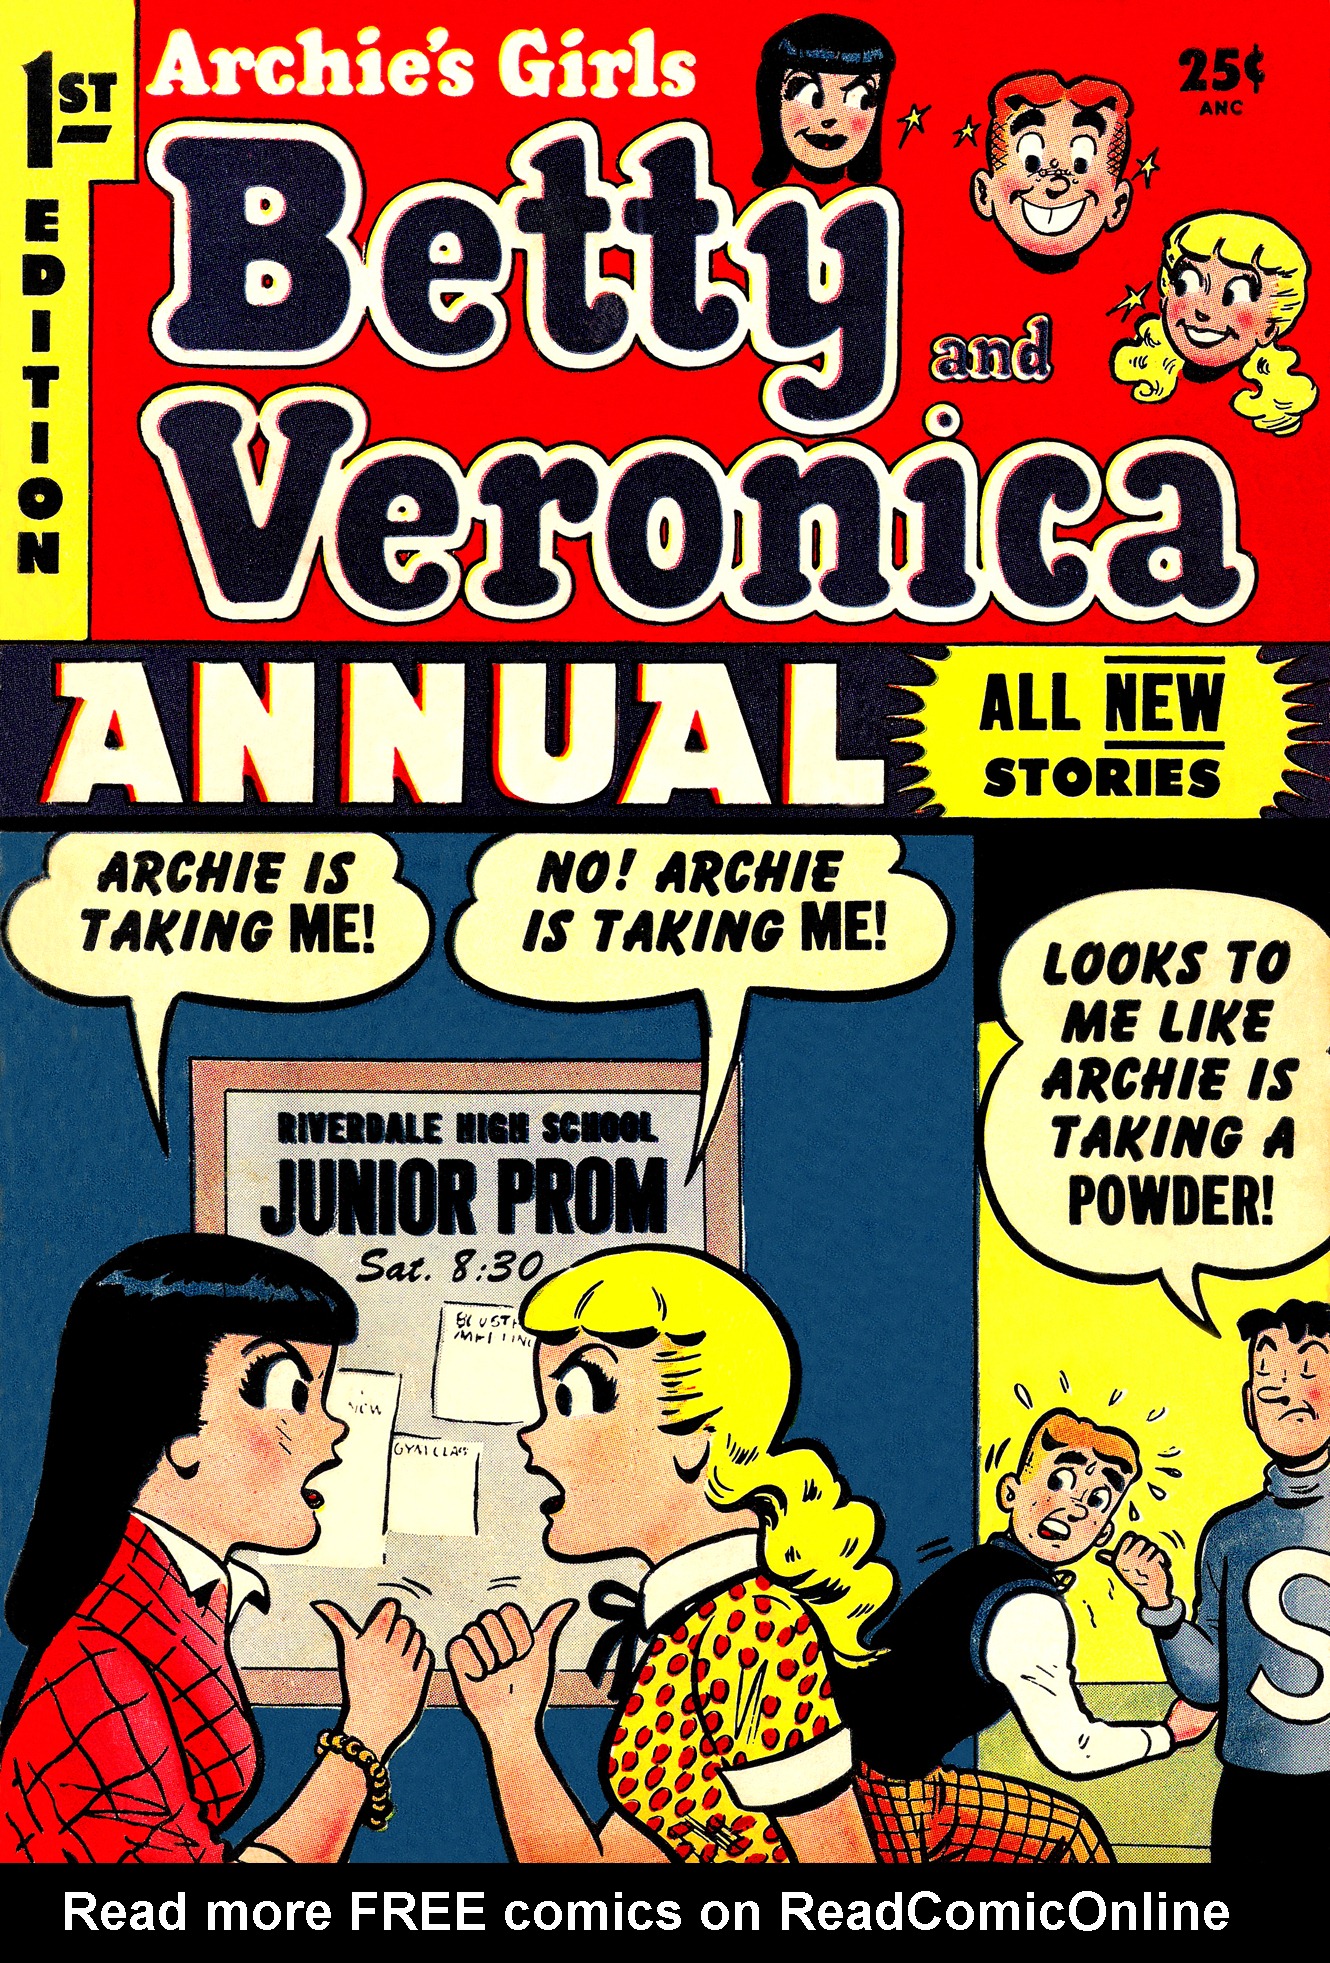 Read online Archie's Girls Betty and Veronica comic -  Issue #Archie's Girls Betty and Veronica Annual 1 - 1